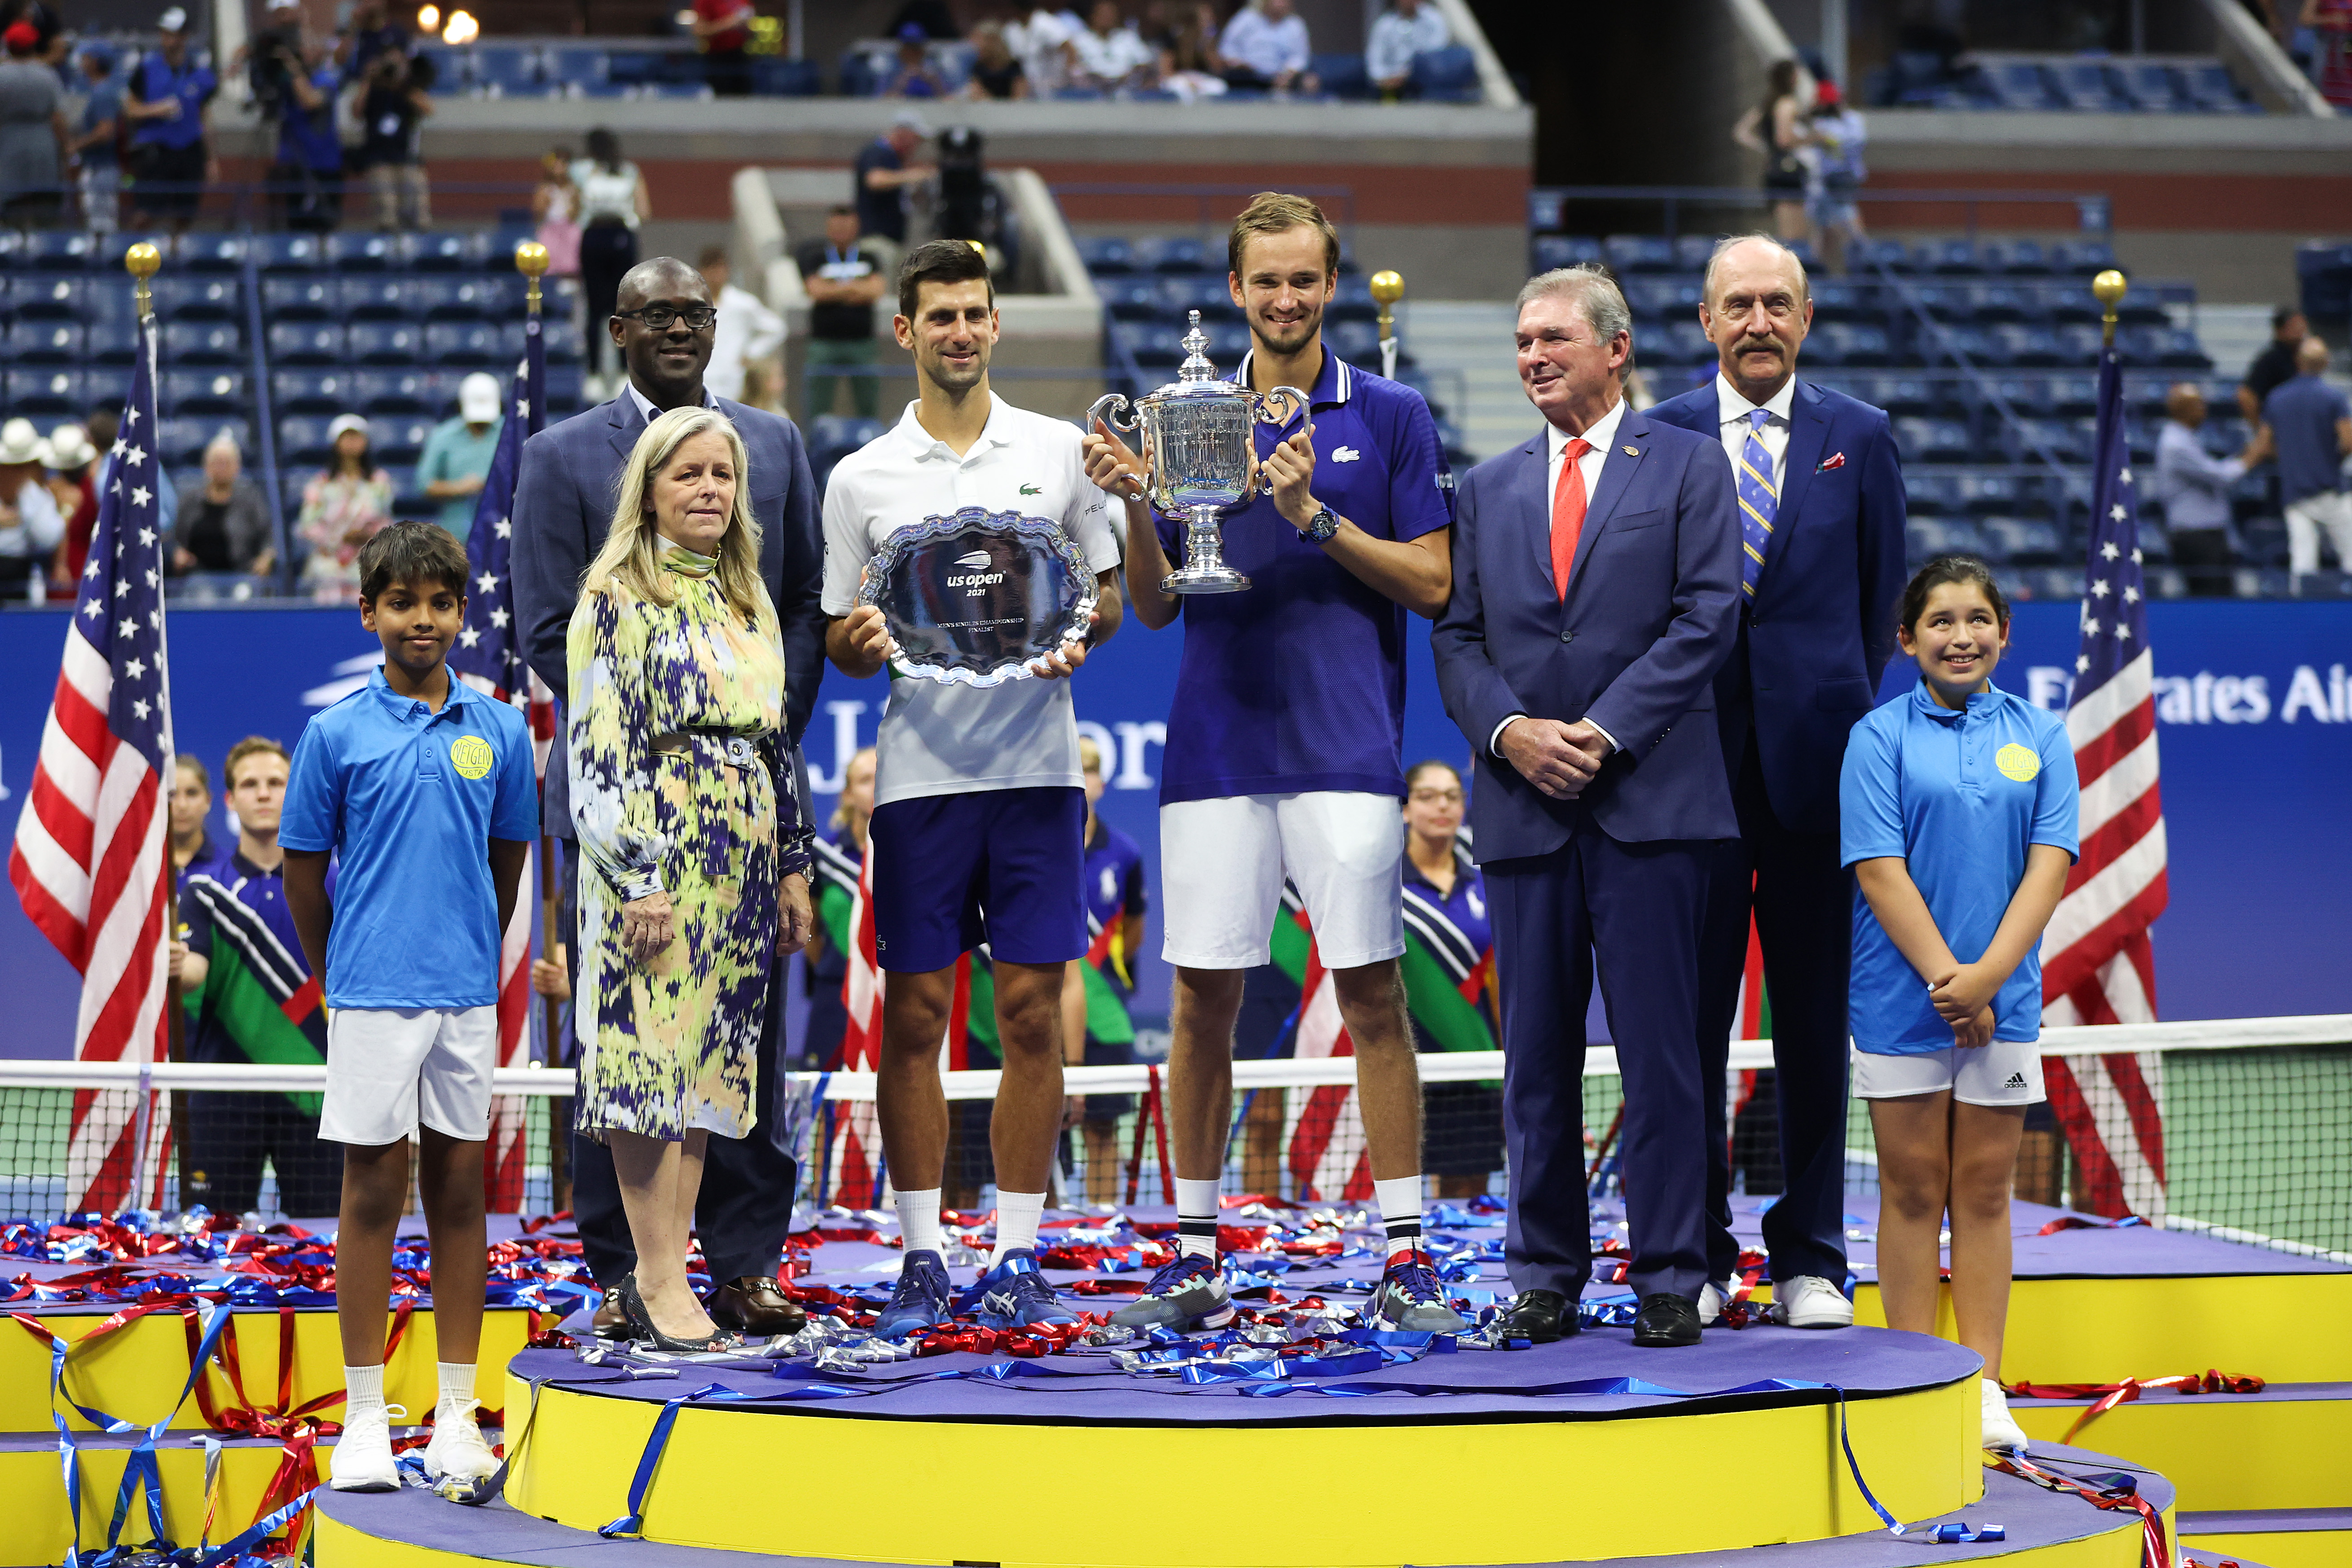 Novak Djokovic of Serbia holds the runner-up trophy alongside Daniil Medvedev of Russia who celebrates with the championship trophy after winning their Men’s Singles final match on Day Fourteen of the 2021 US Open at the USTA Billie Jean King National Tennis Center on September 12, 2021 in the Flushing neighborhood of the Queens borough of New York City.